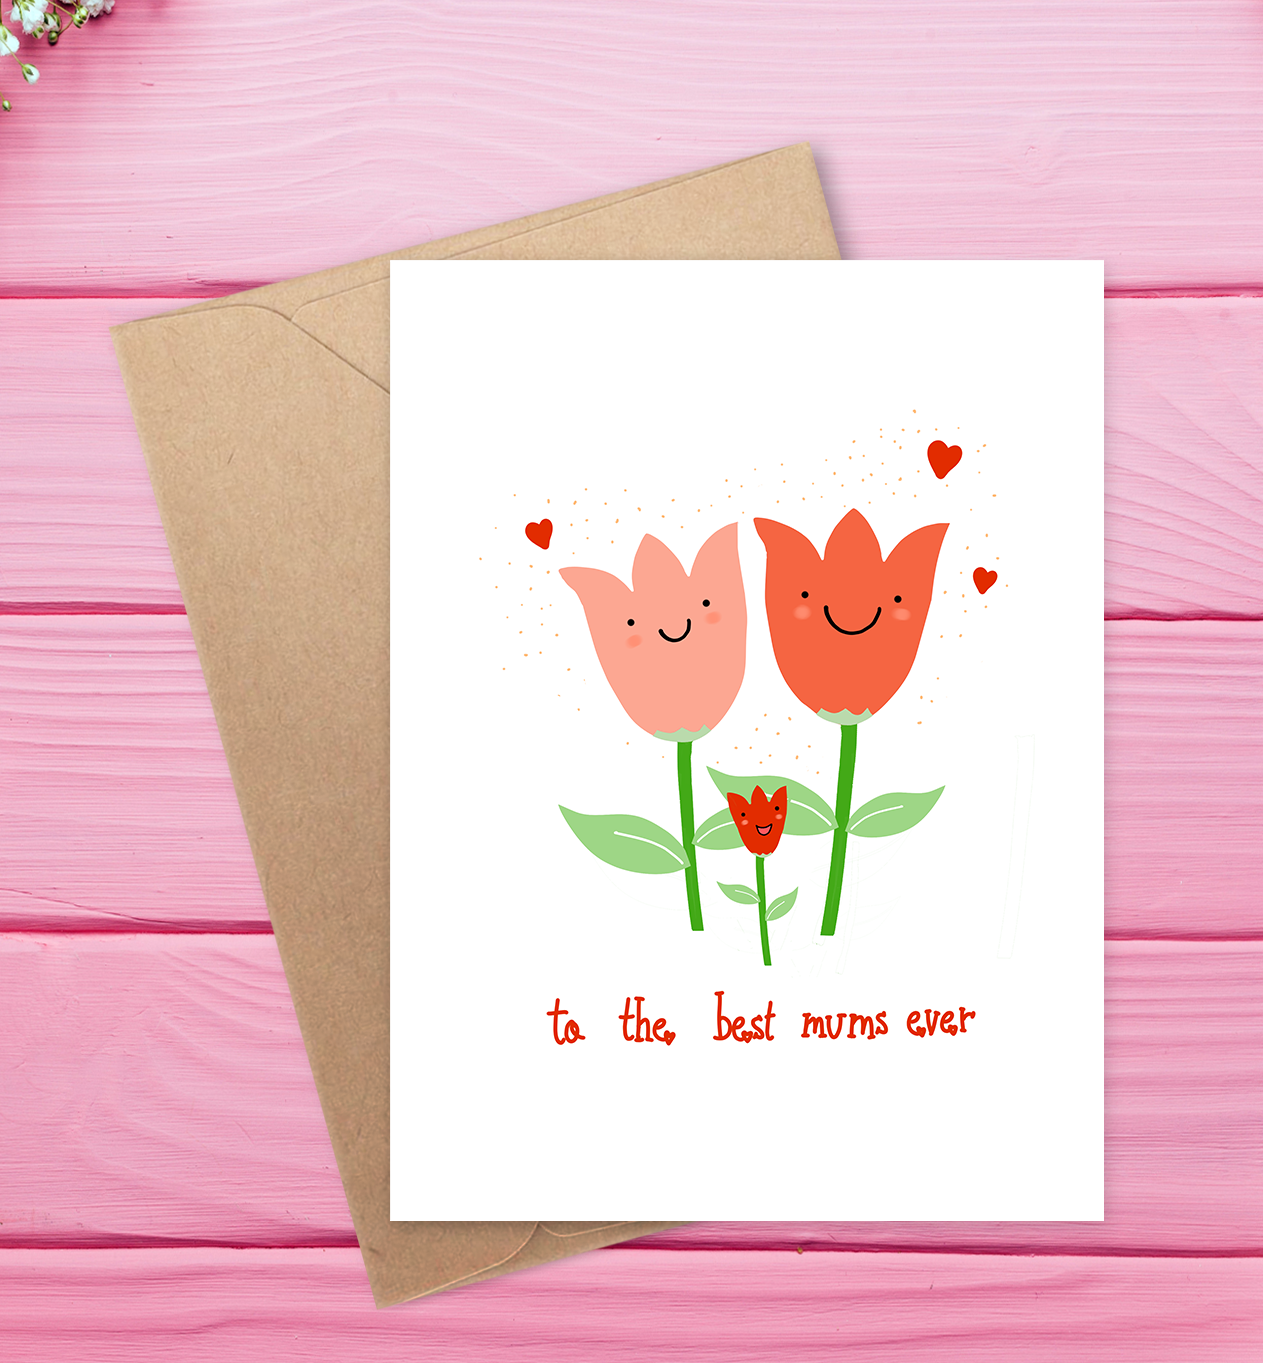 To The Best Mums Ever Greeting Card featuring two flowers and a child flower